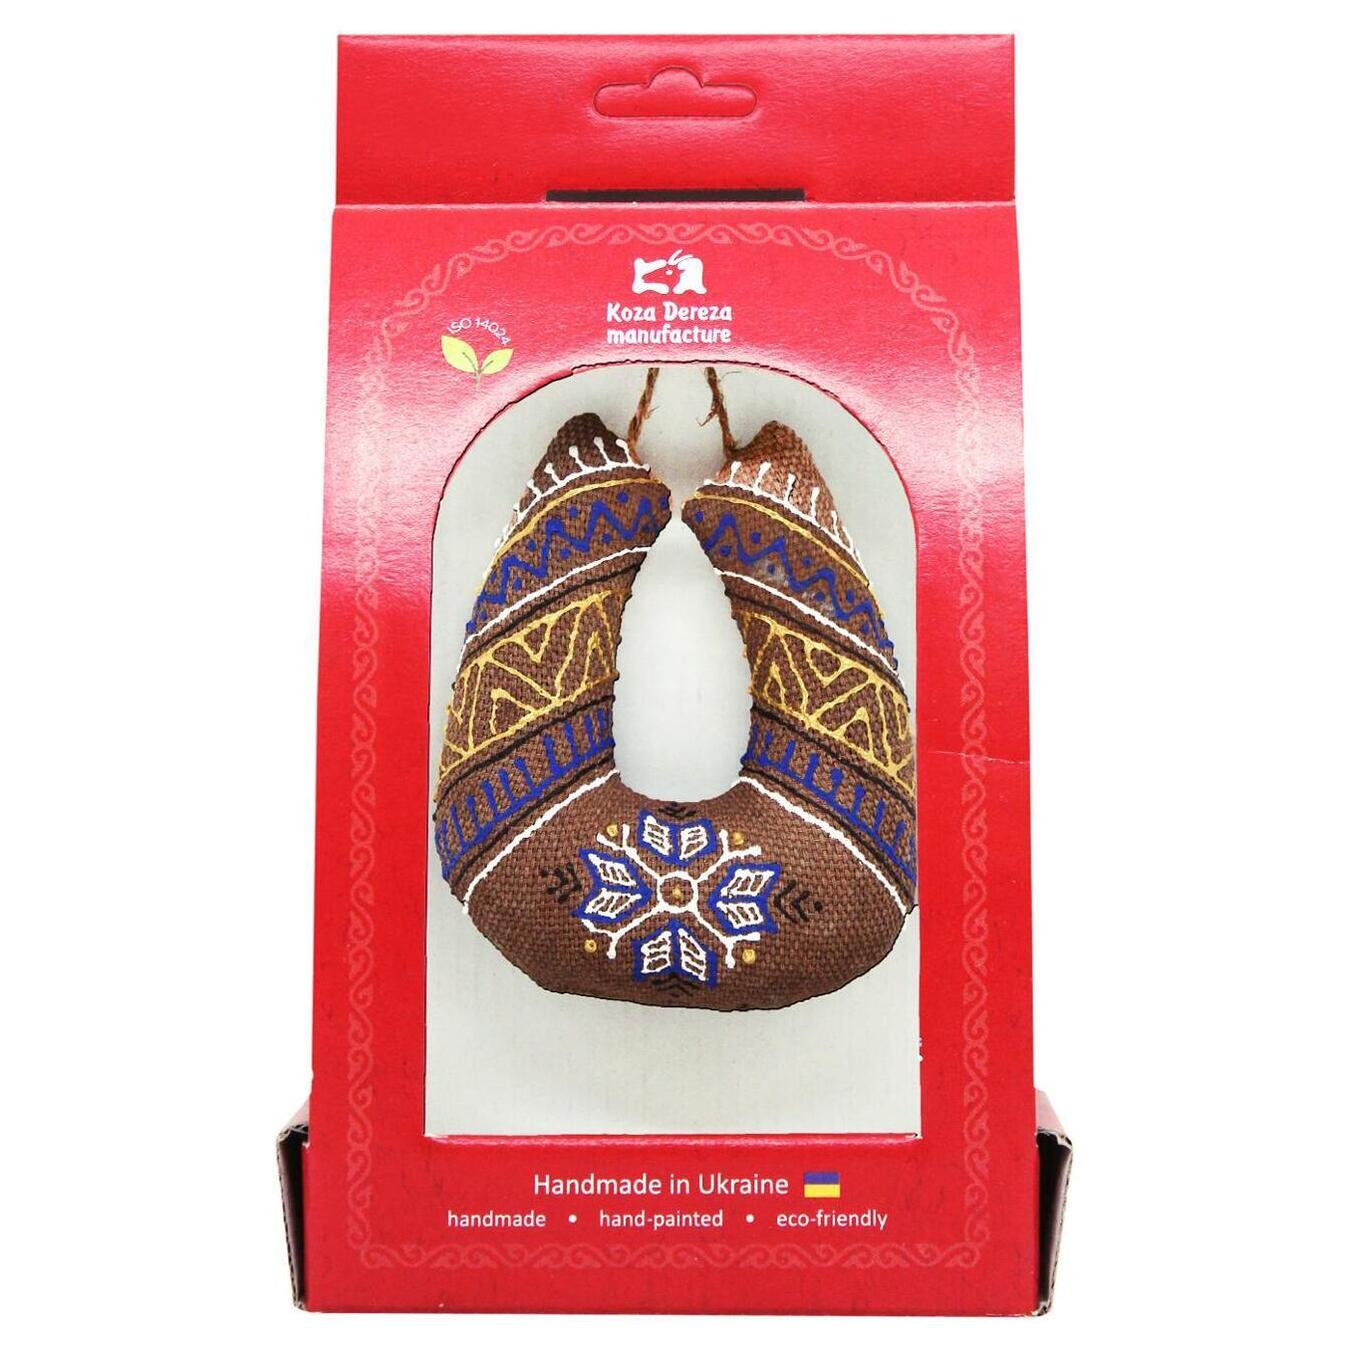 Souvenir Koza Dereza Manufacture Horseshoe with a blue pattern with coffee aroma